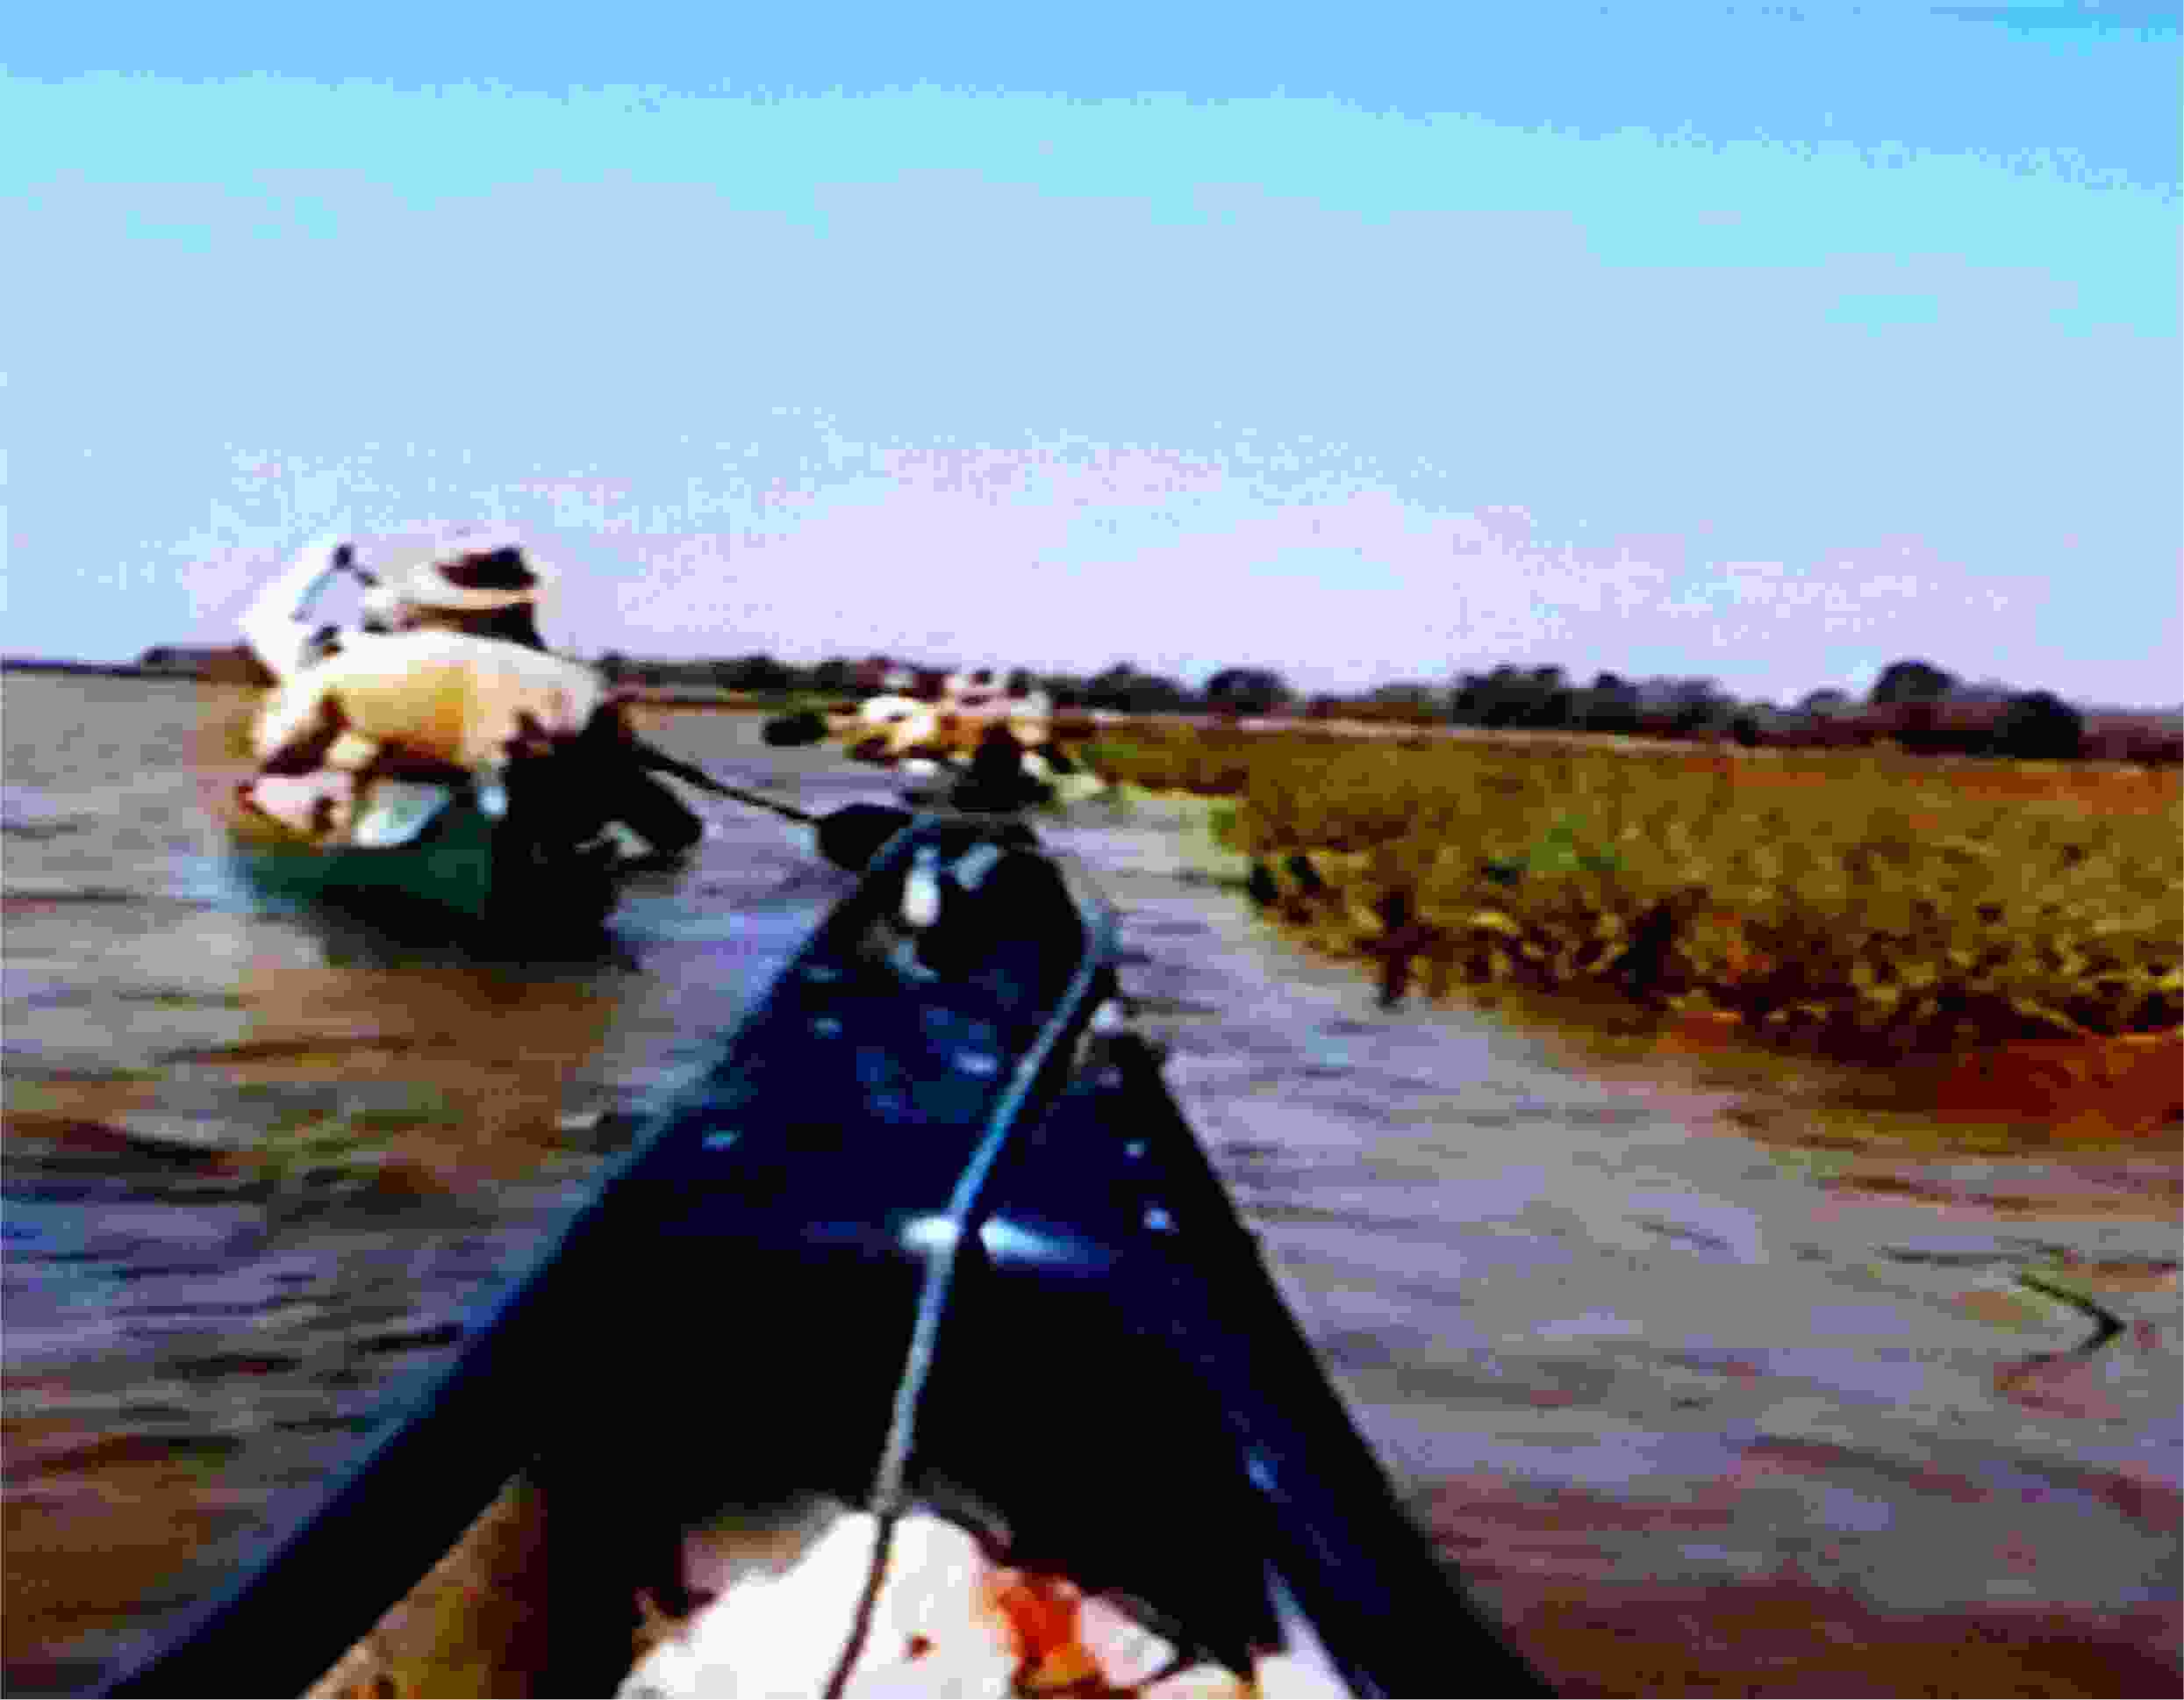 We paddled as much as 25 kilometers or more each day.  It was wonderful.  Photo from video by FG.